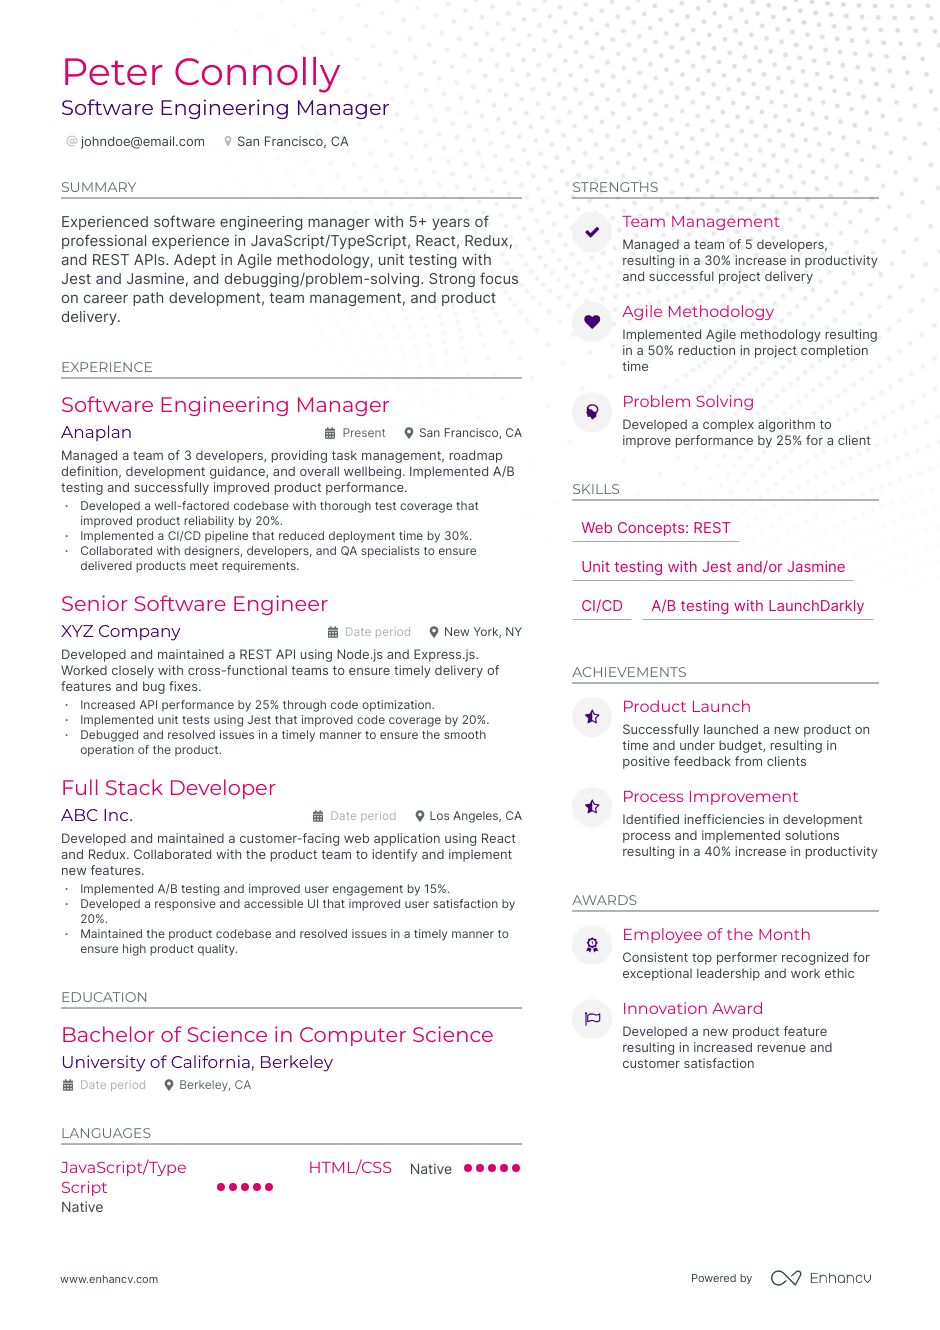 Software Engineering Manager resume example